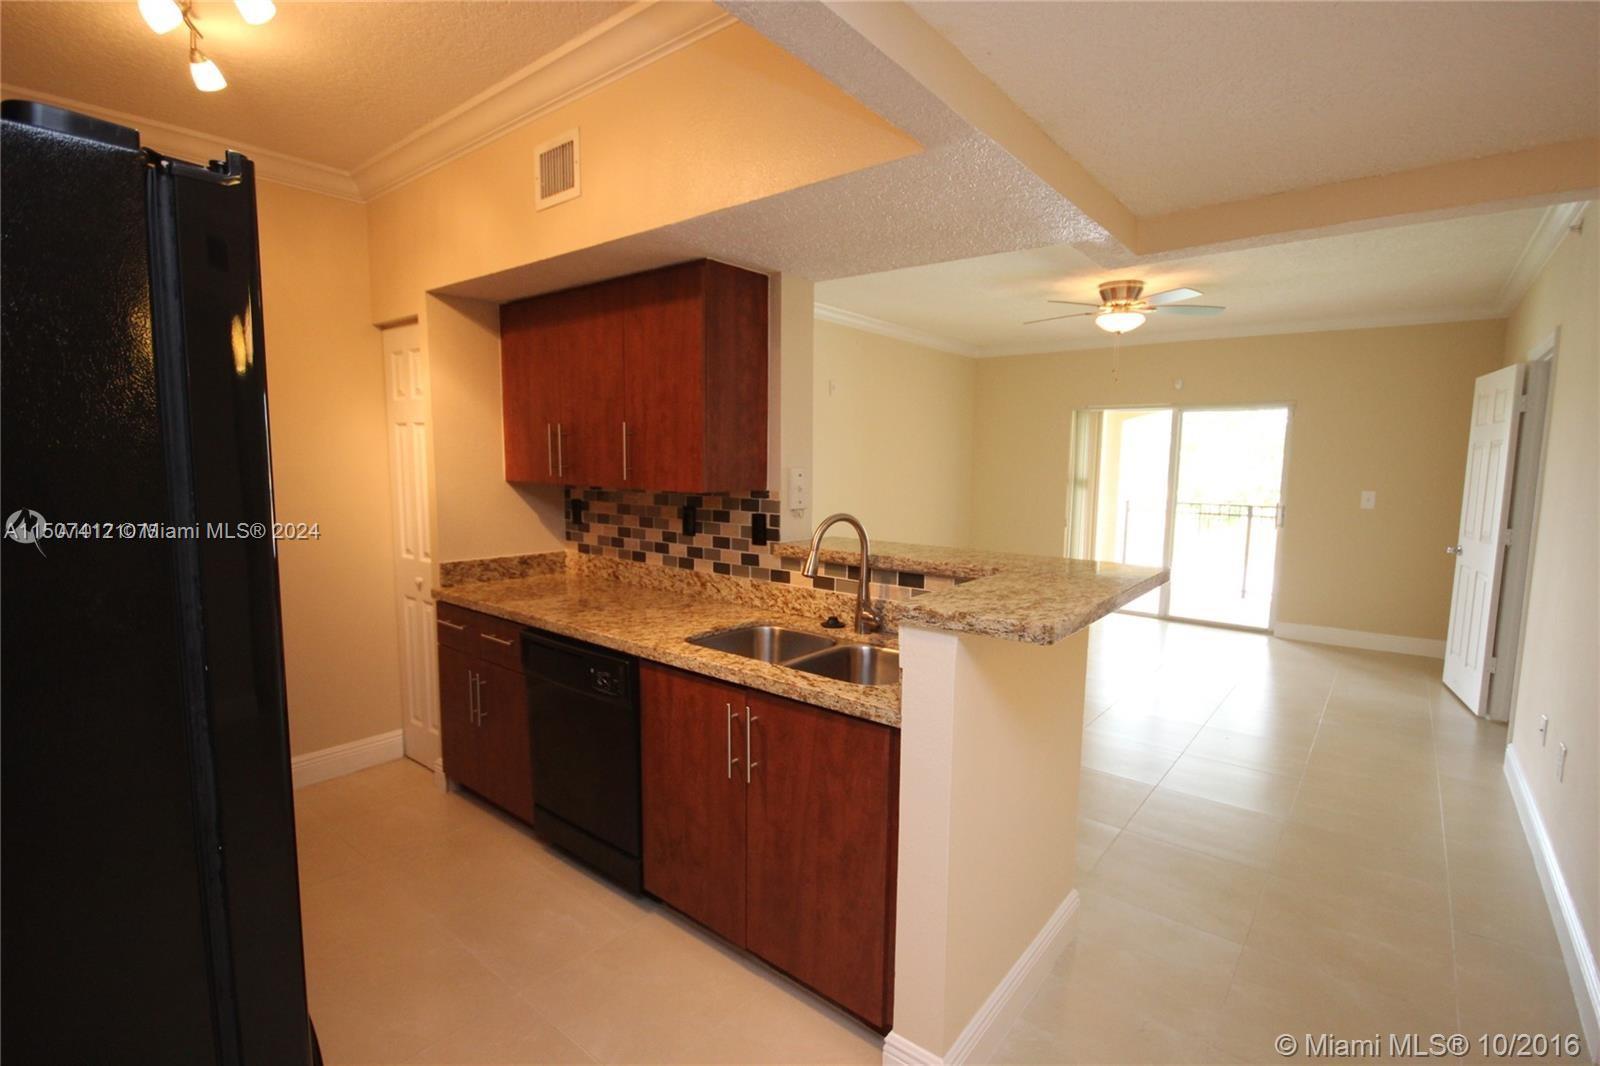 Photo of 231 SW 116th Ave #19206 in Pembroke Pines, FL